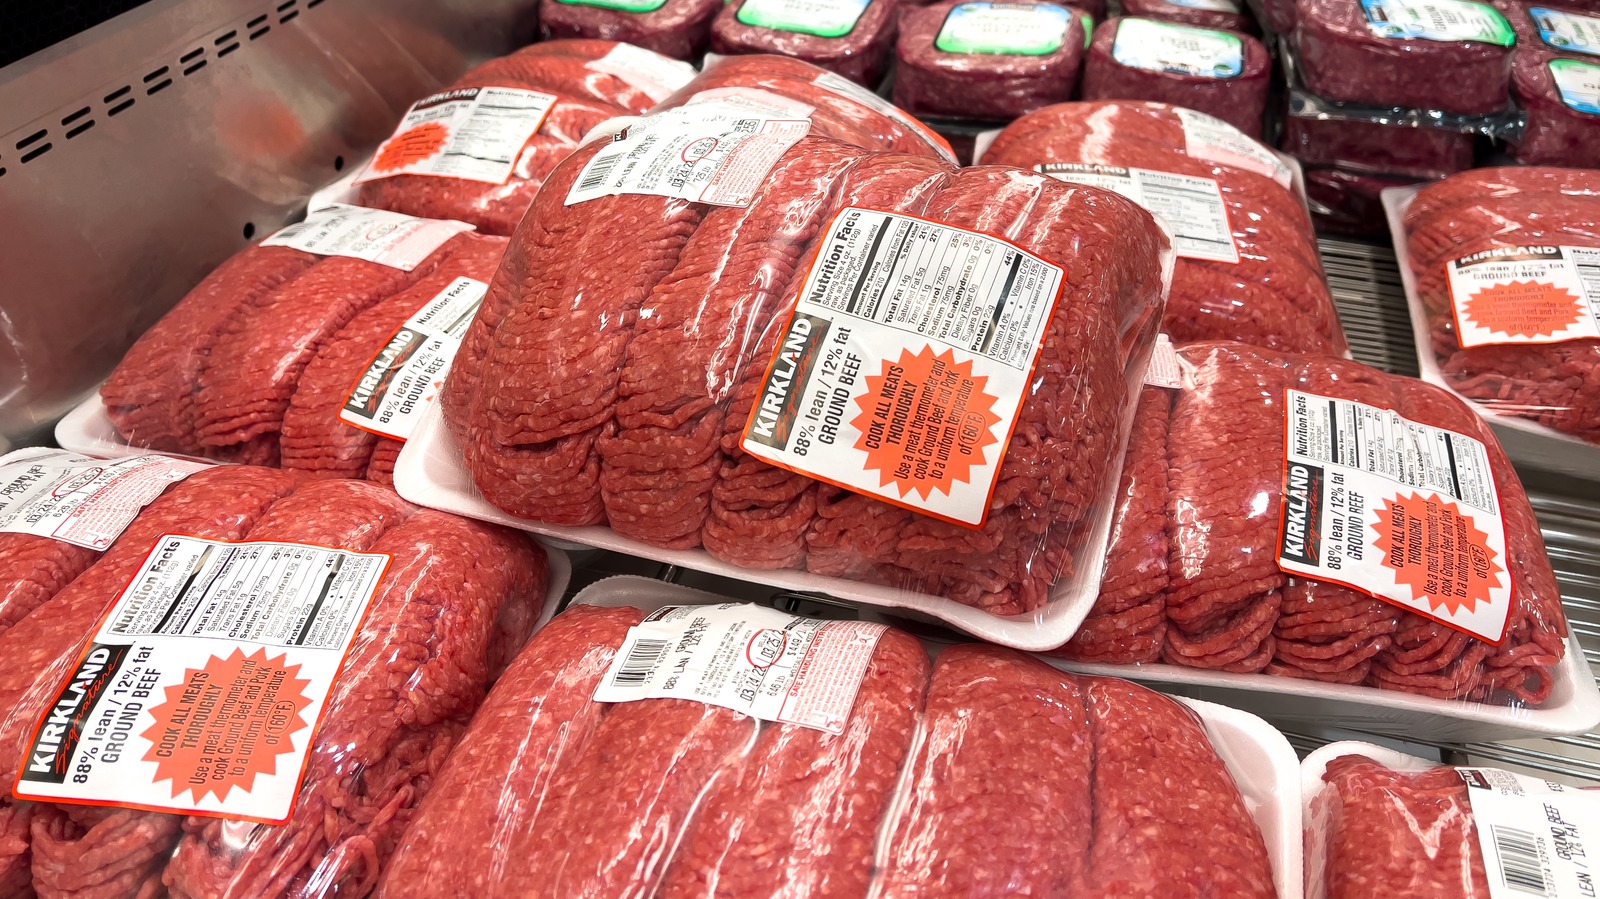 https://www.tastingtable.com/img/gallery/the-simple-tip-for-getting-cheaper-ground-beef-at-costco/l-intro-1693604997.jpg